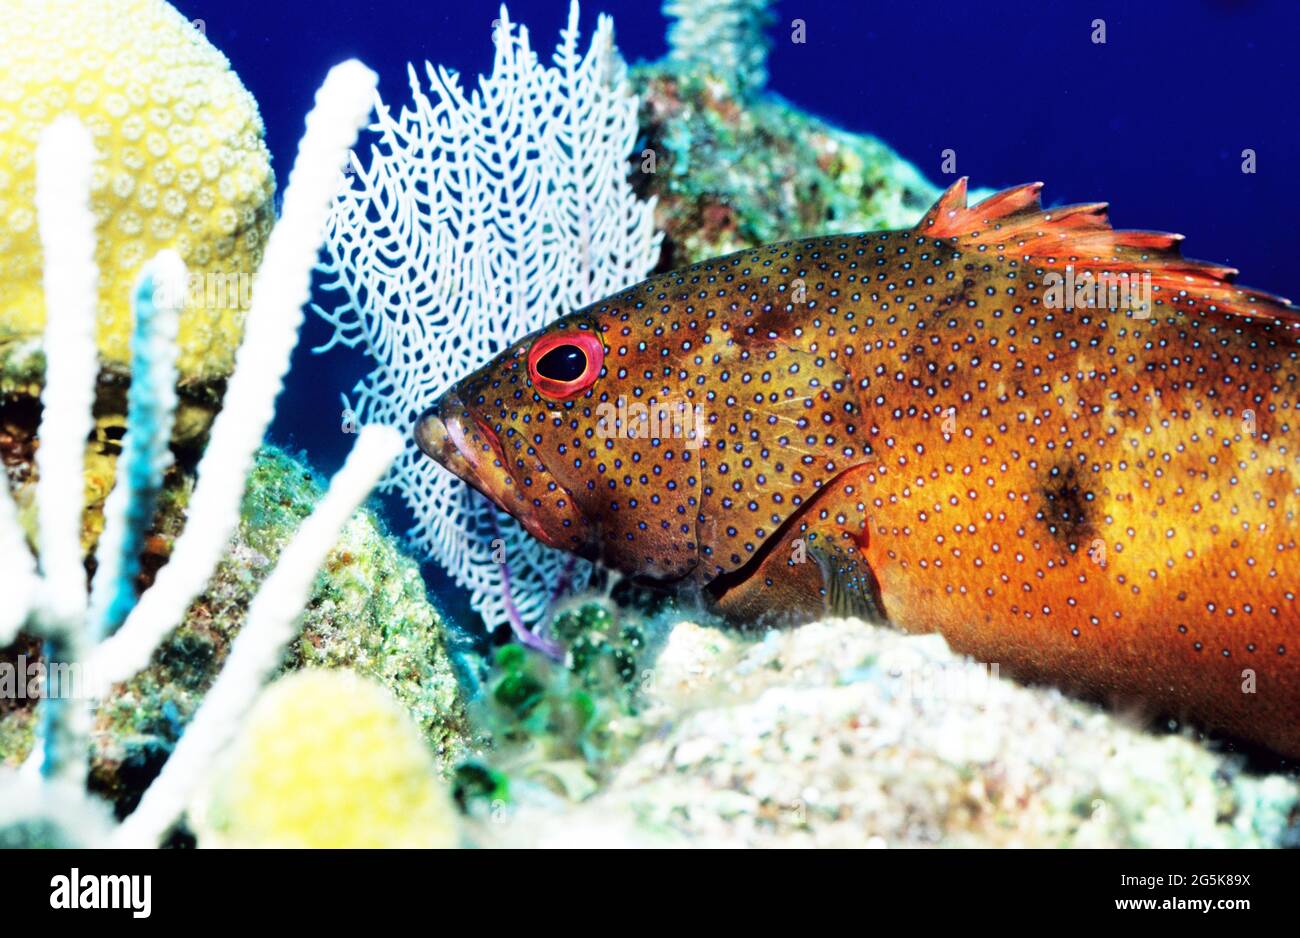 Coney resting on coral reef, Provo, Turks and Caicos Islands Stock Photo